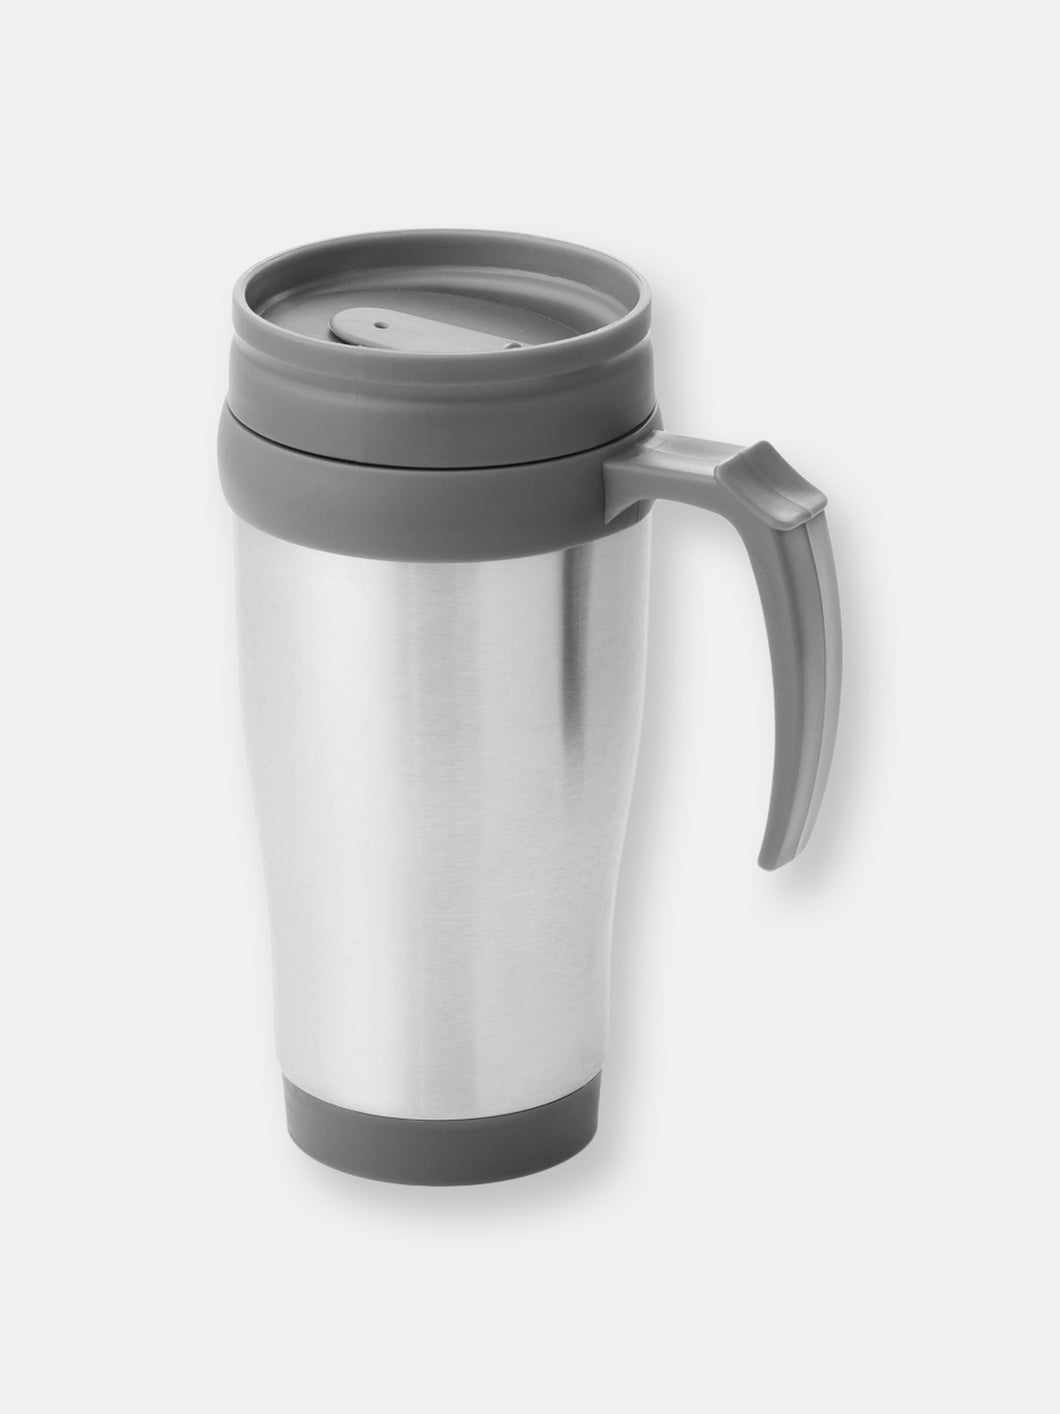 Bullet Sanibel Insulated Mug (Pack of 2) (Silver/Gray) (4.7 x 7.1 x 3.1 inches)